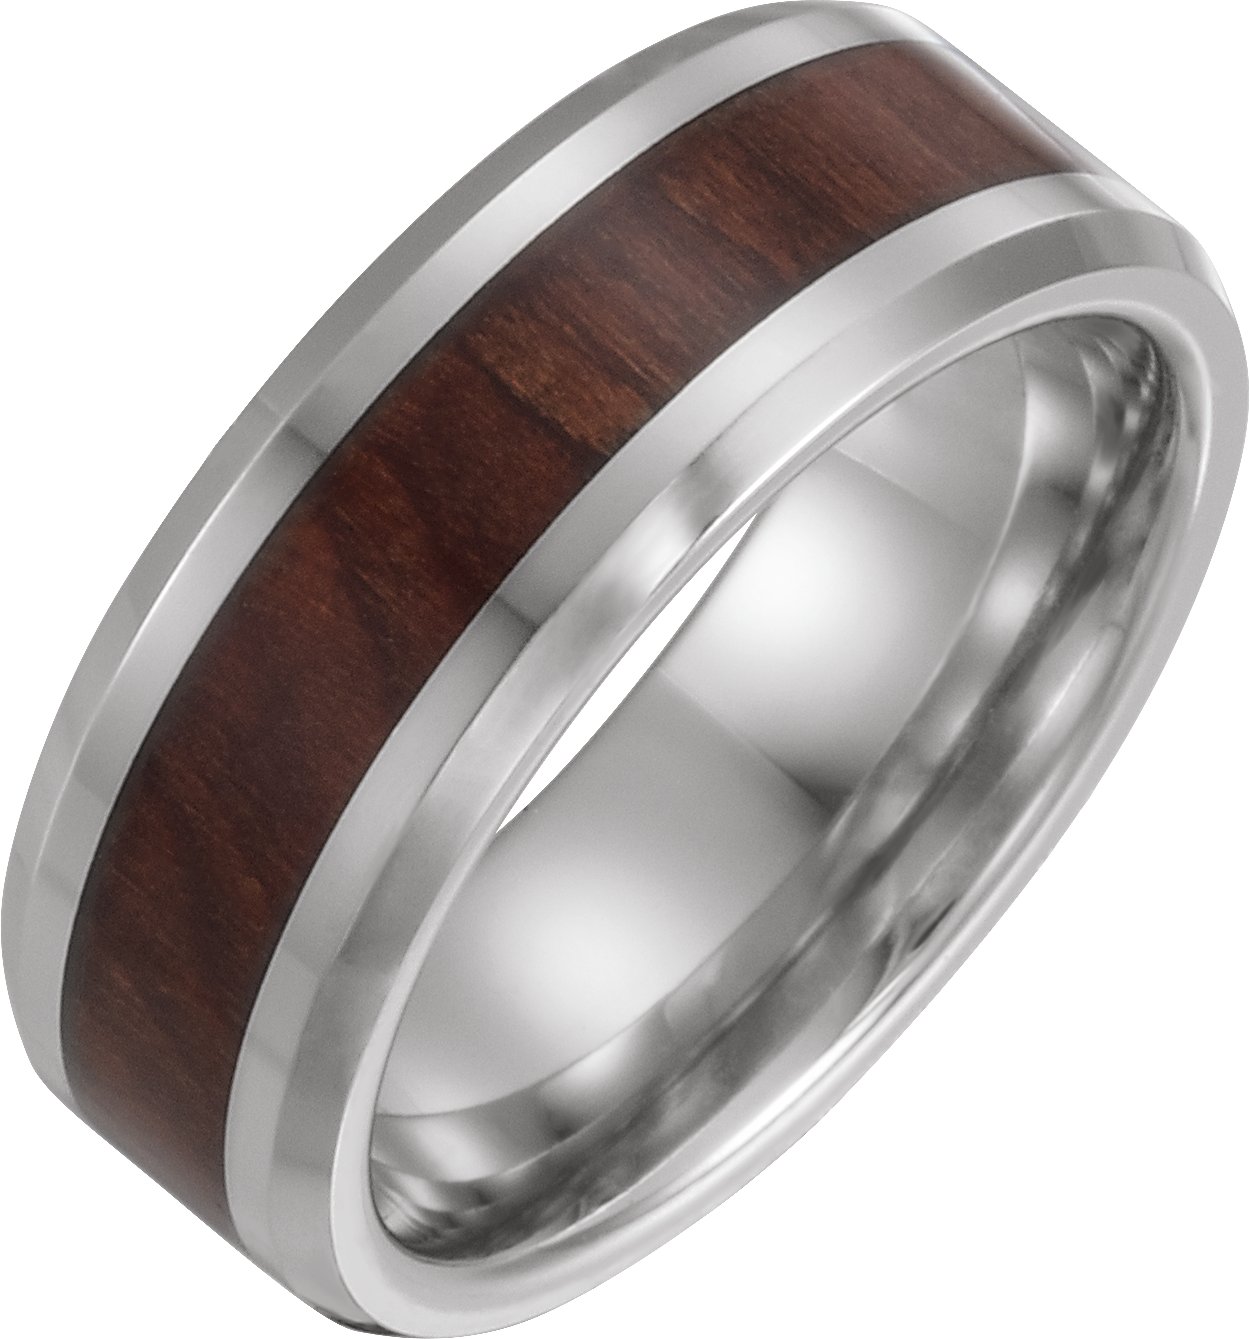 Cobalt 8 mm Beveled Edge Band with Wood Inlay Size 6 Ref 15067988